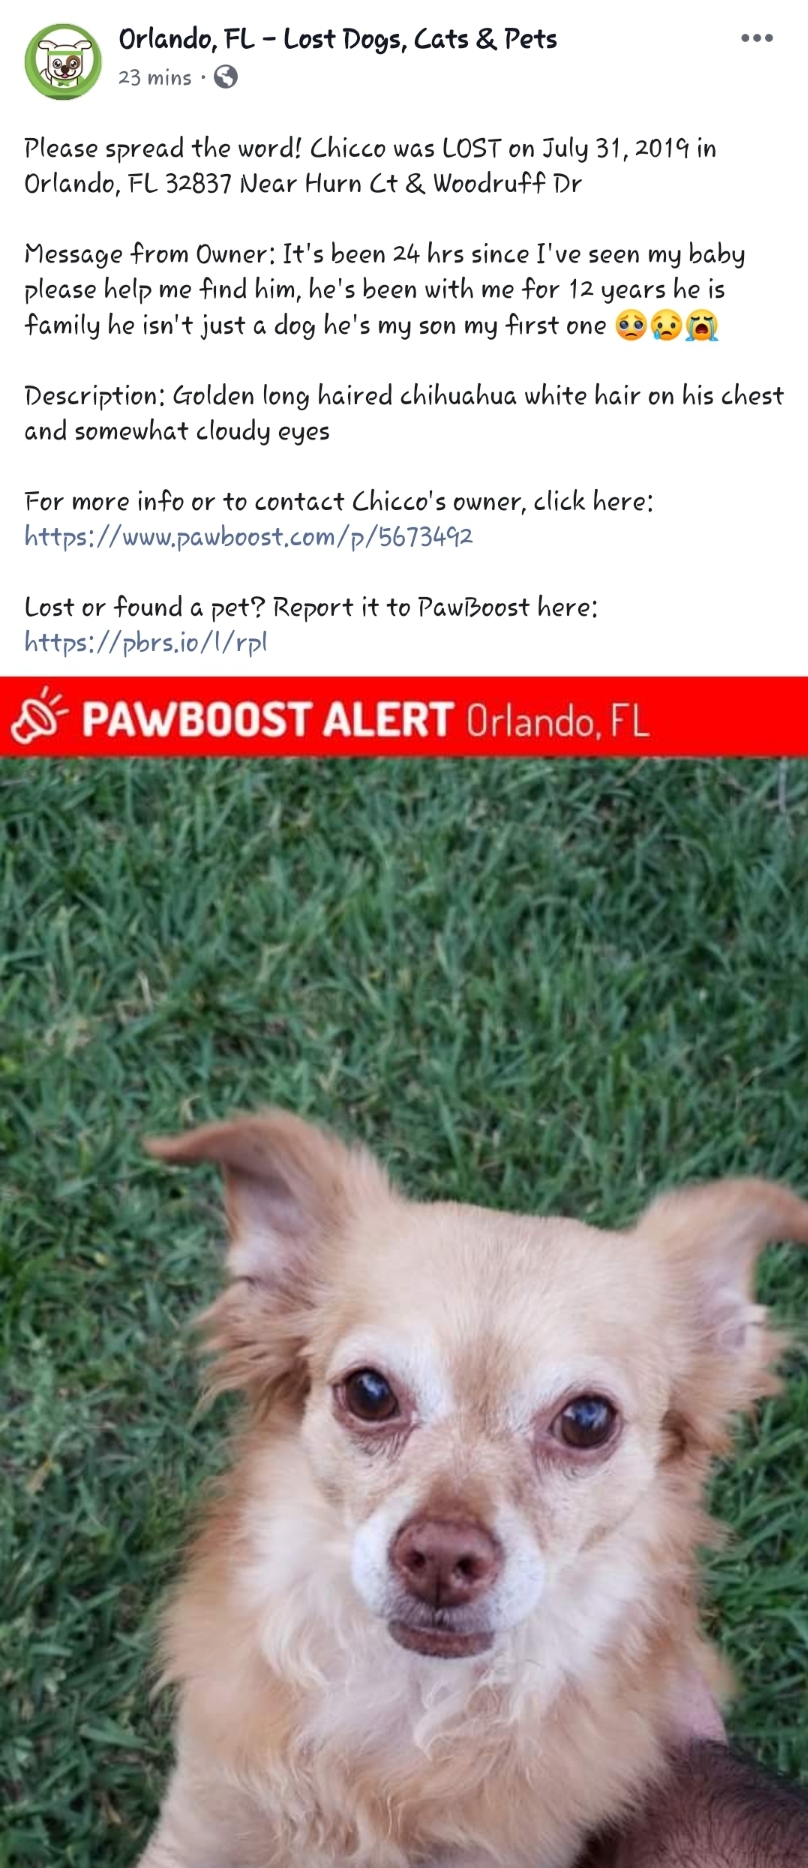 Image of Chicco, Lost Dog